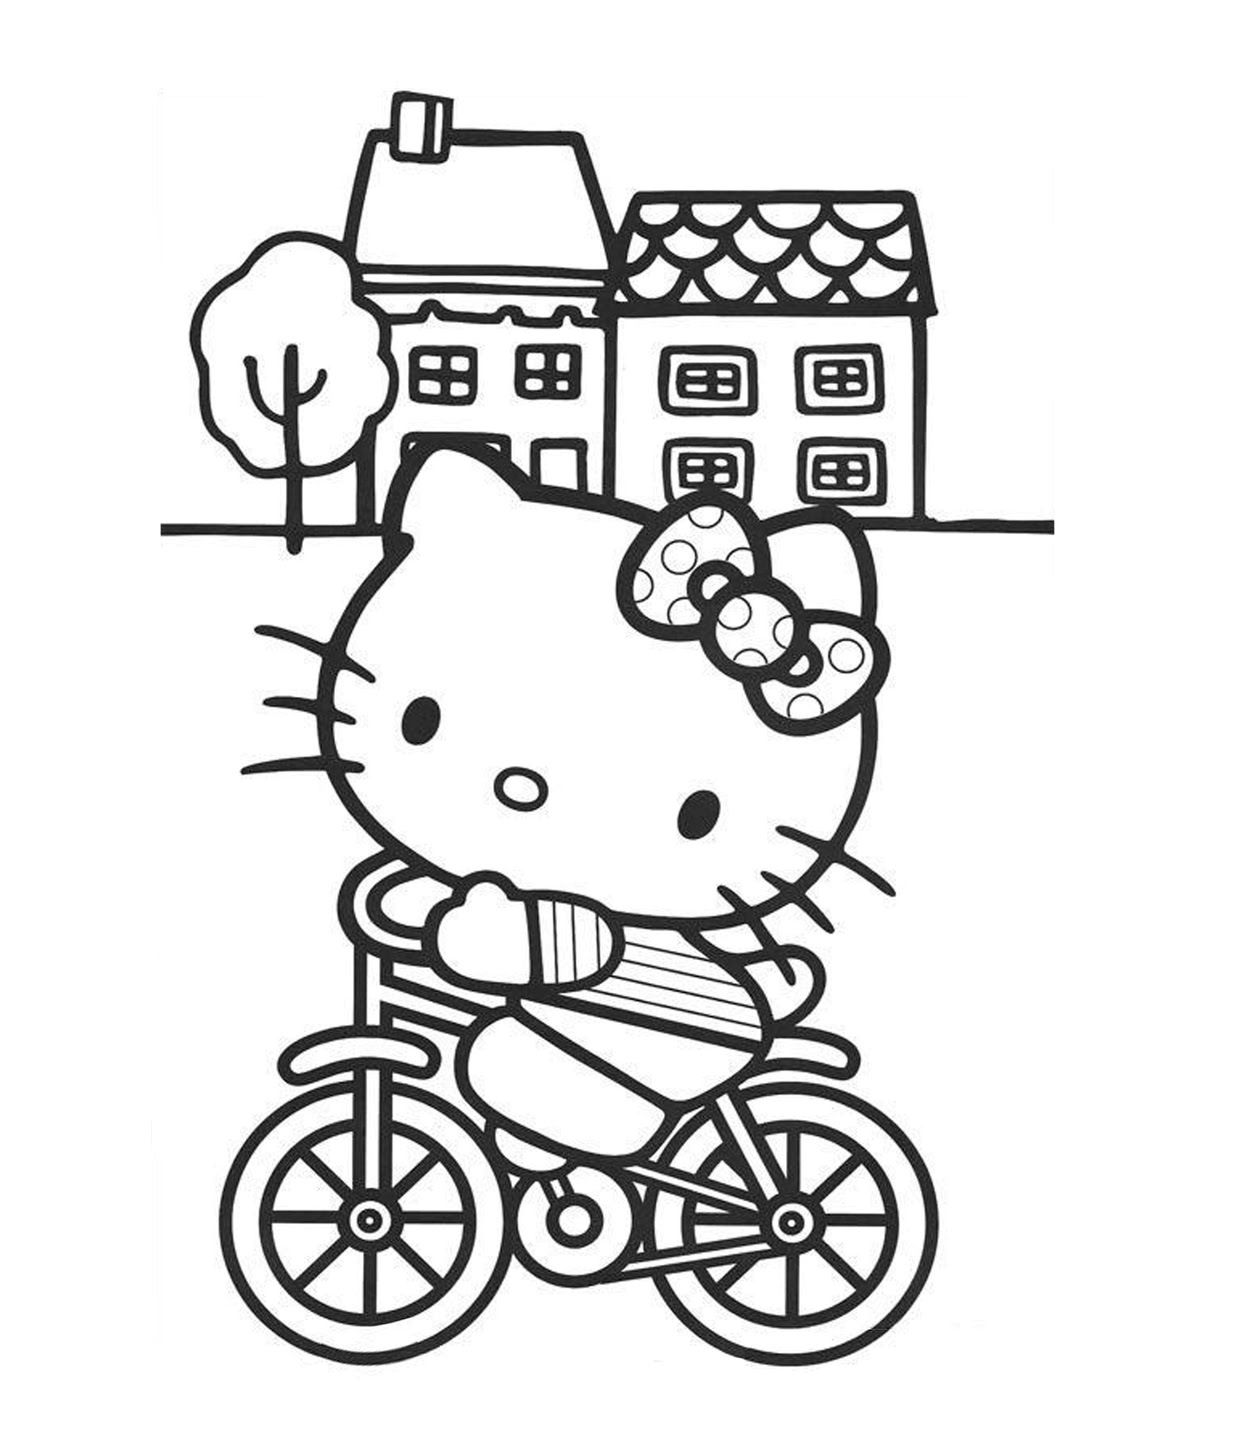 Riding Bicycle Coloring Page For Kids | Transportation Coloring ...